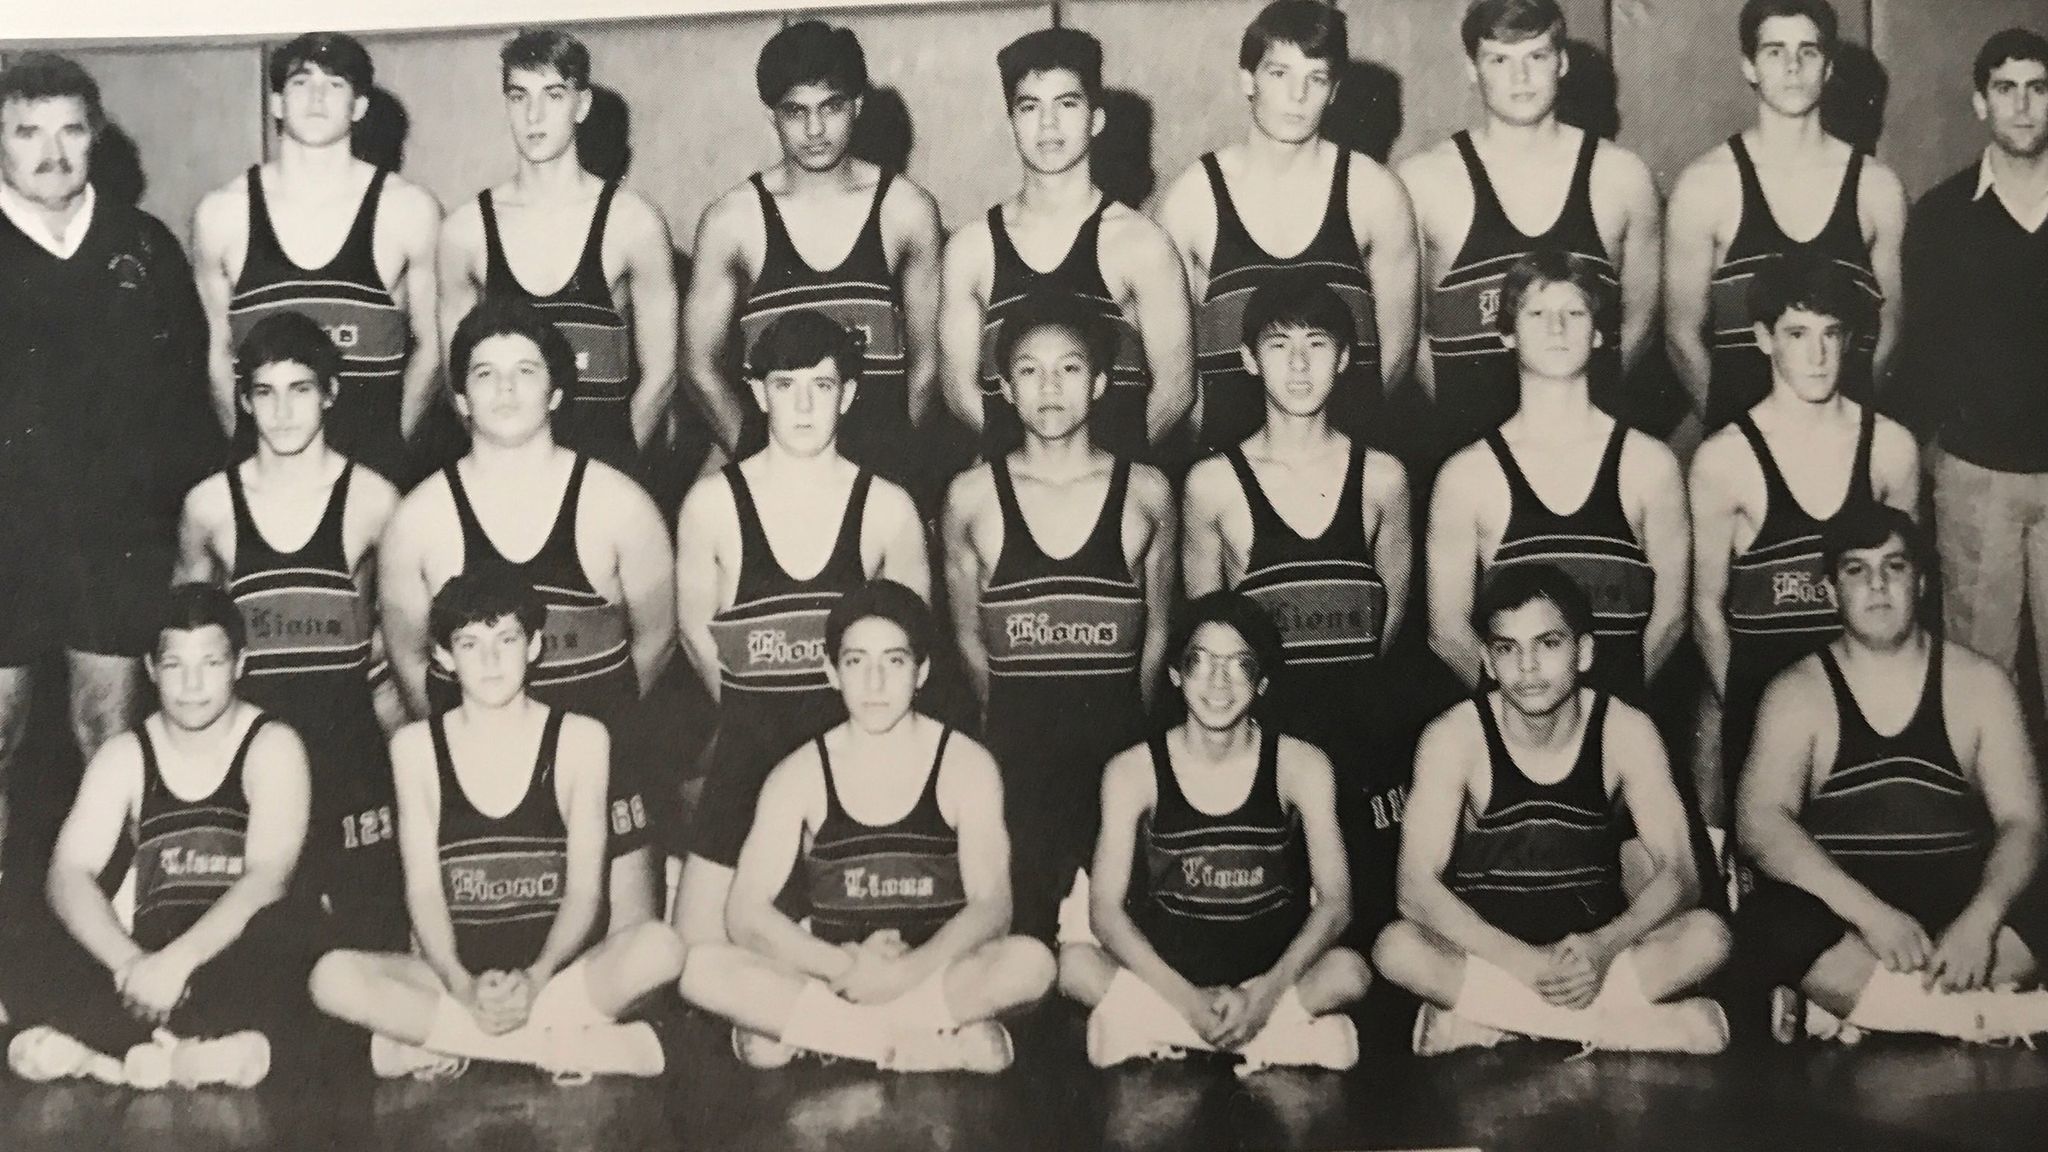 A team photo in the 1987 Westminster High School yearbook with Timothy Vu, center.